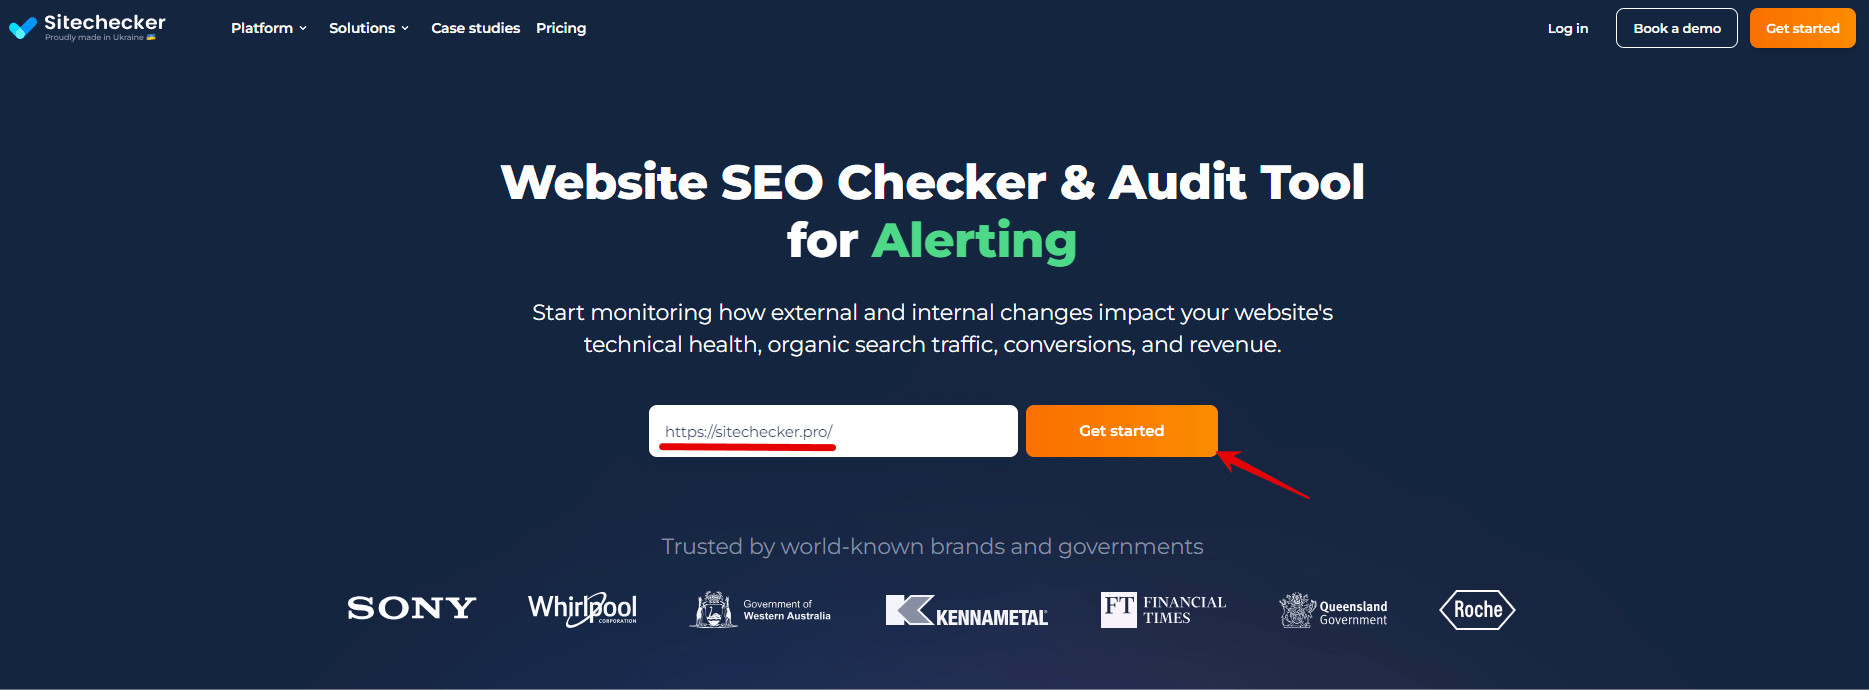 website seo checker and audit tool